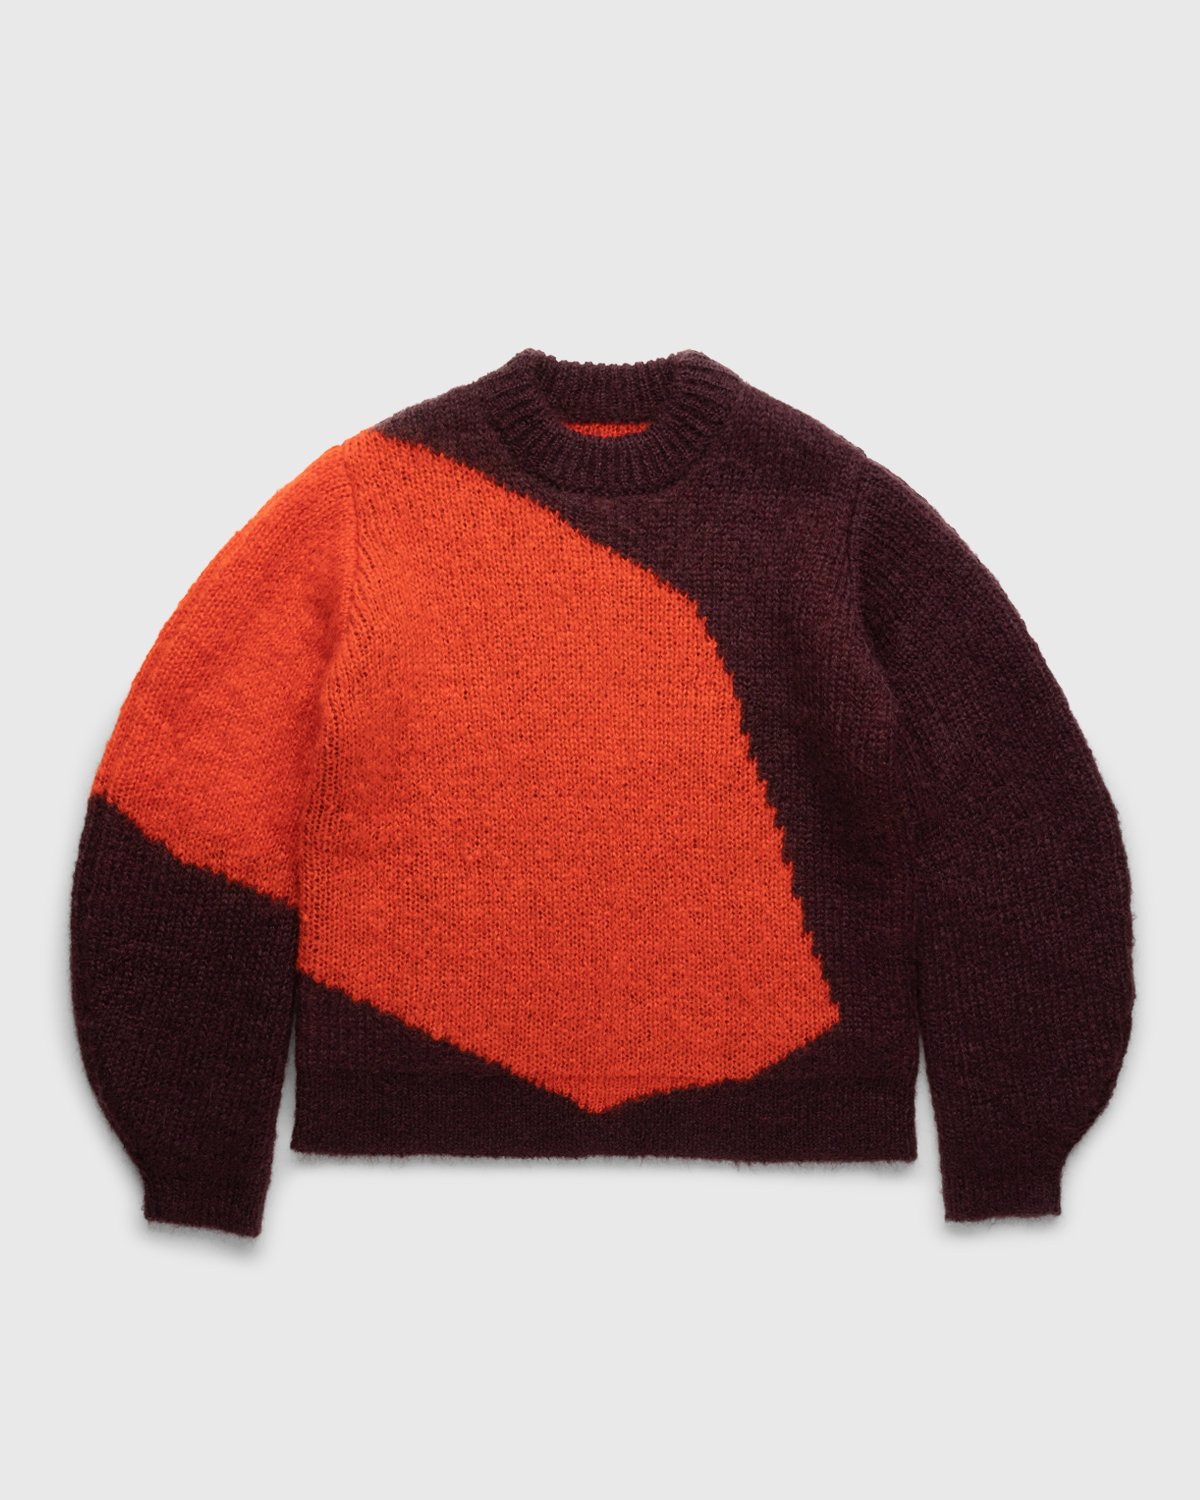 Jil Sander - Sweater Knitted Open Red - Clothing - Red - Image 1